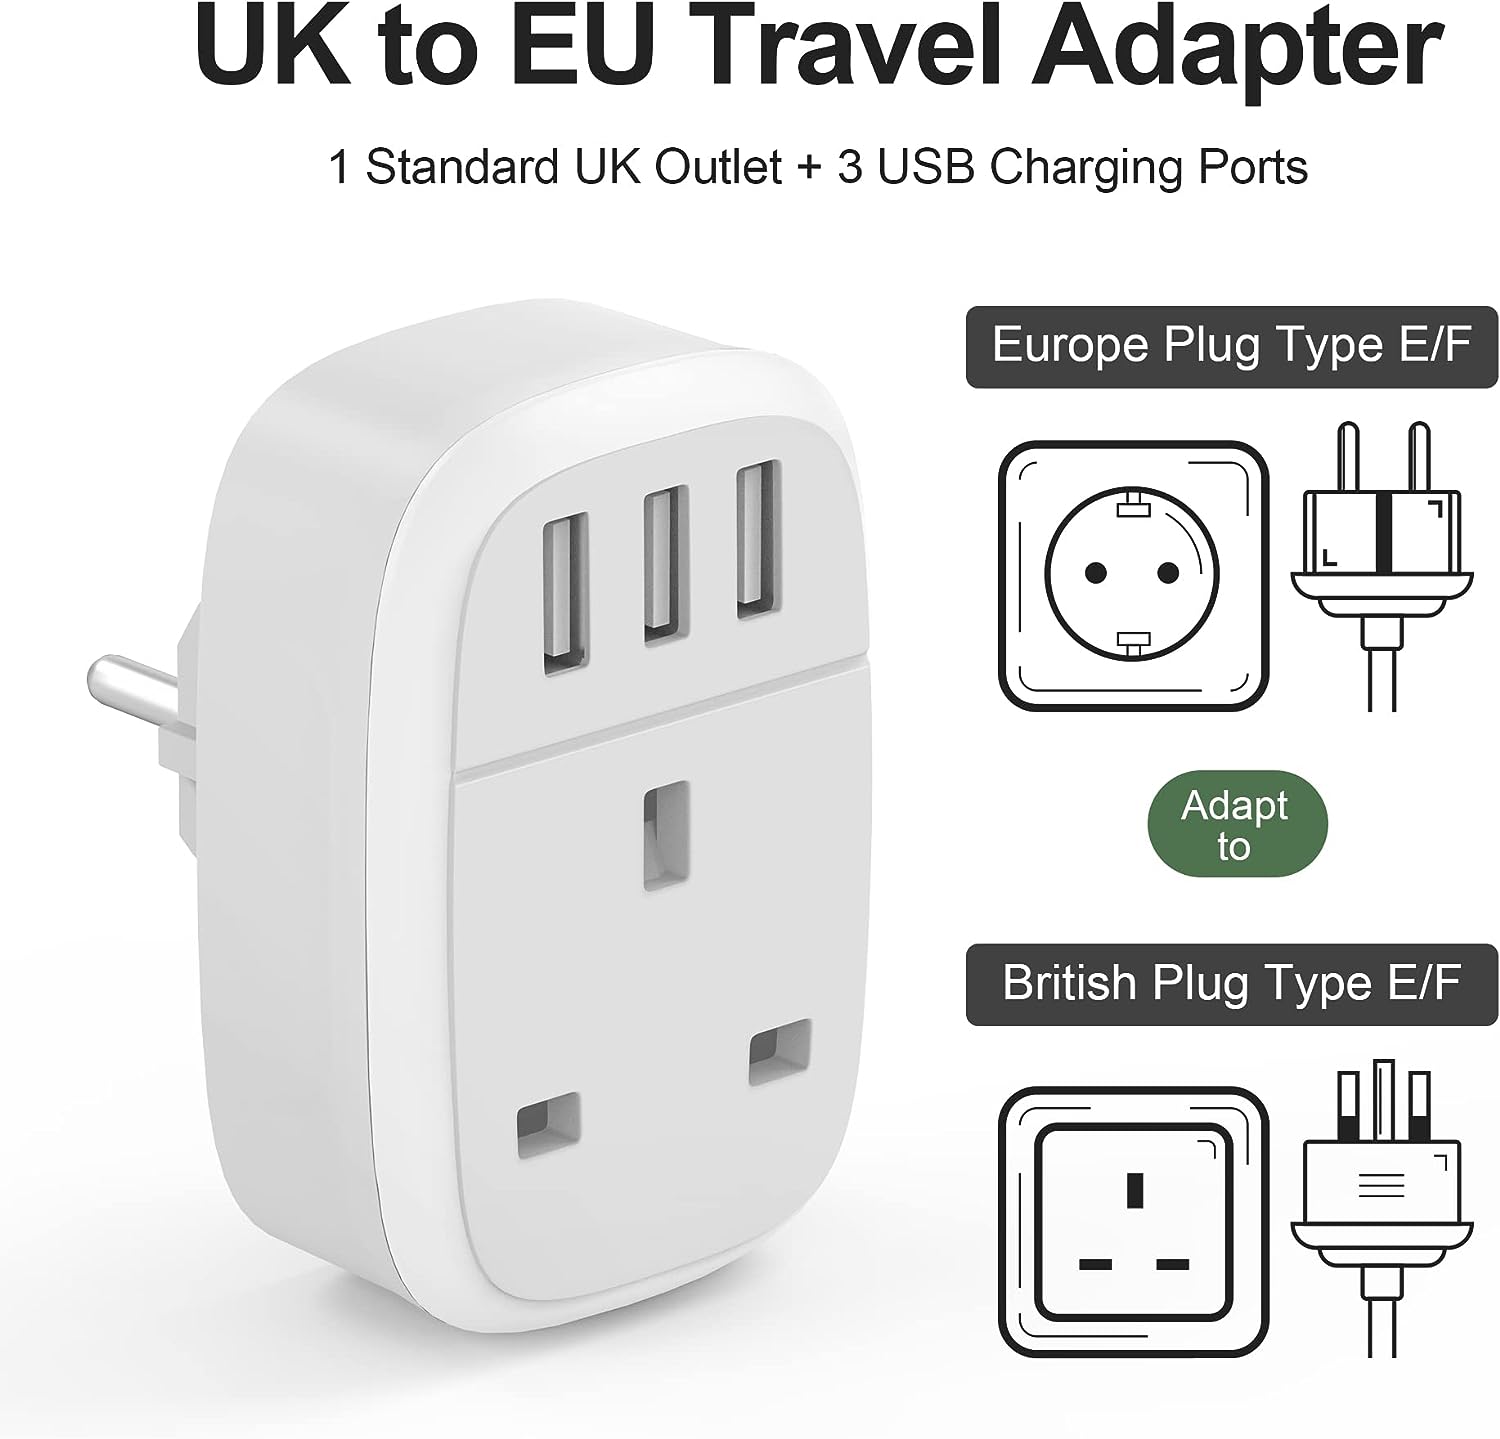 4-in-1 UK to EU Travel Adaptor (1 UK + 3 USB) - CRUISE APPROVED Anchors Up